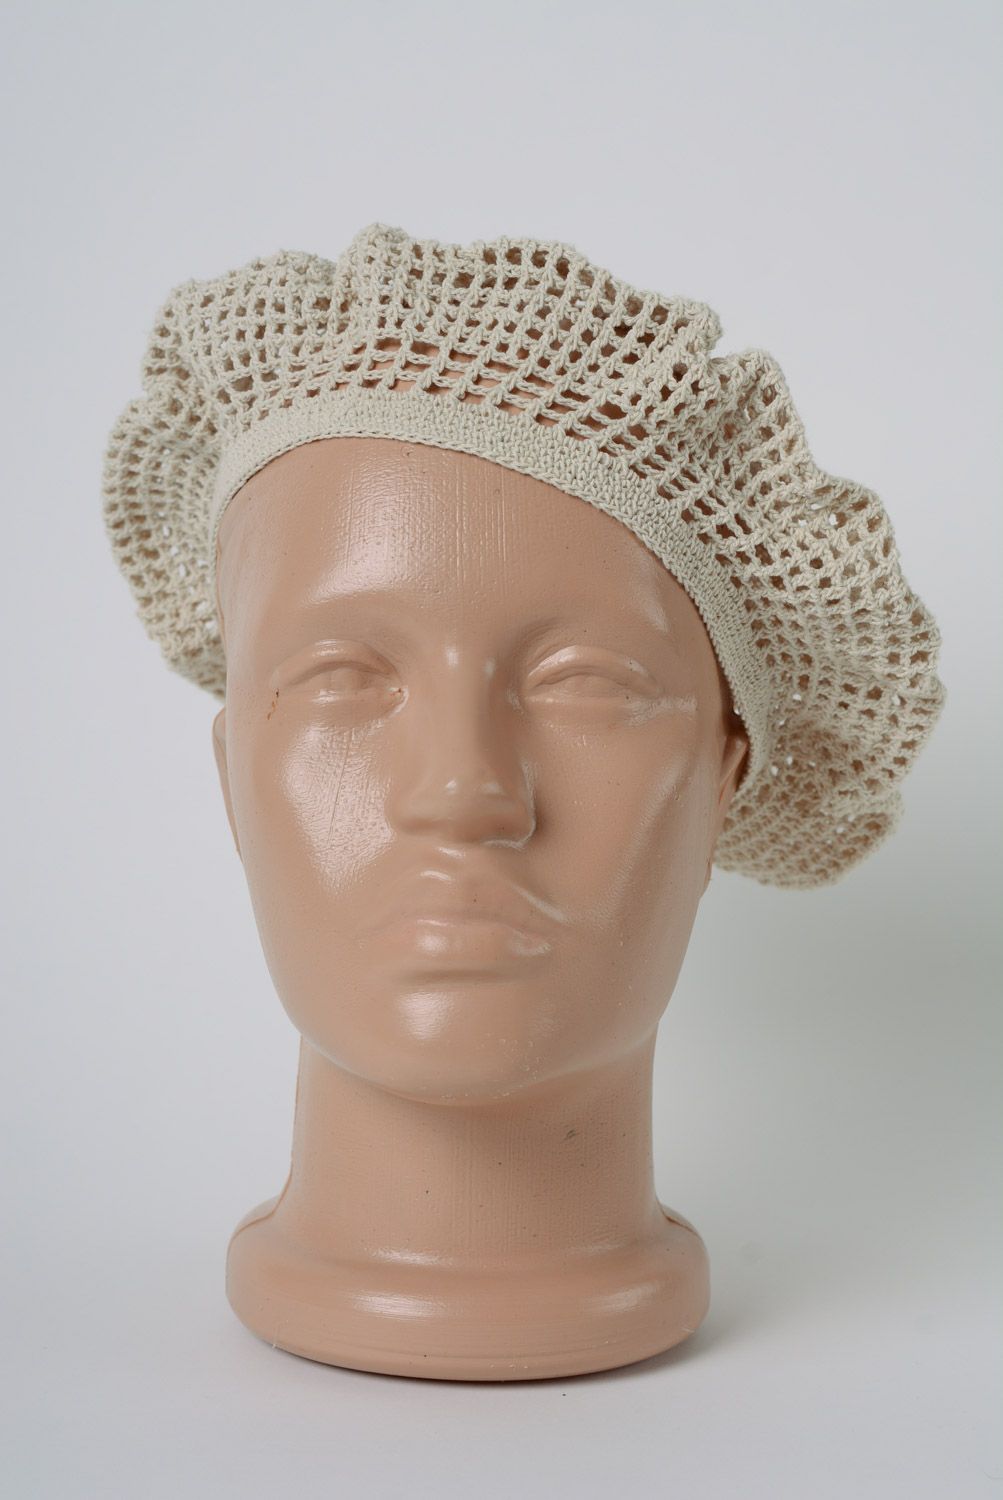 Tender lacy handmade beret hat crocheted of beige cotton threads for women photo 3